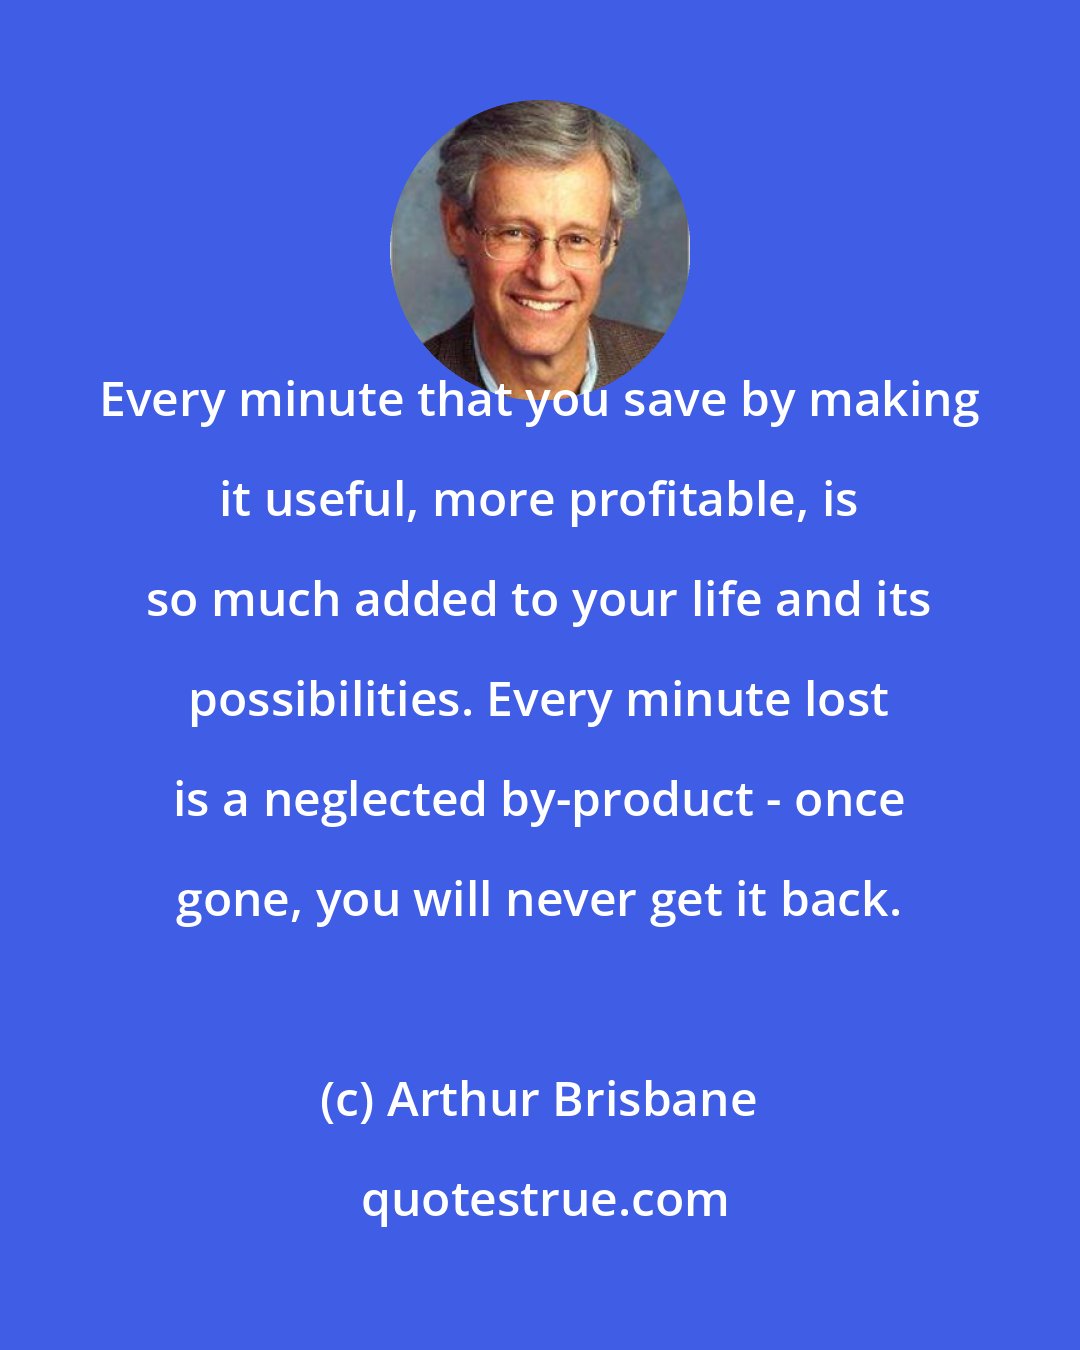 Arthur Brisbane: Every minute that you save by making it useful, more profitable, is so much added to your life and its possibilities. Every minute lost is a neglected by-product - once gone, you will never get it back.